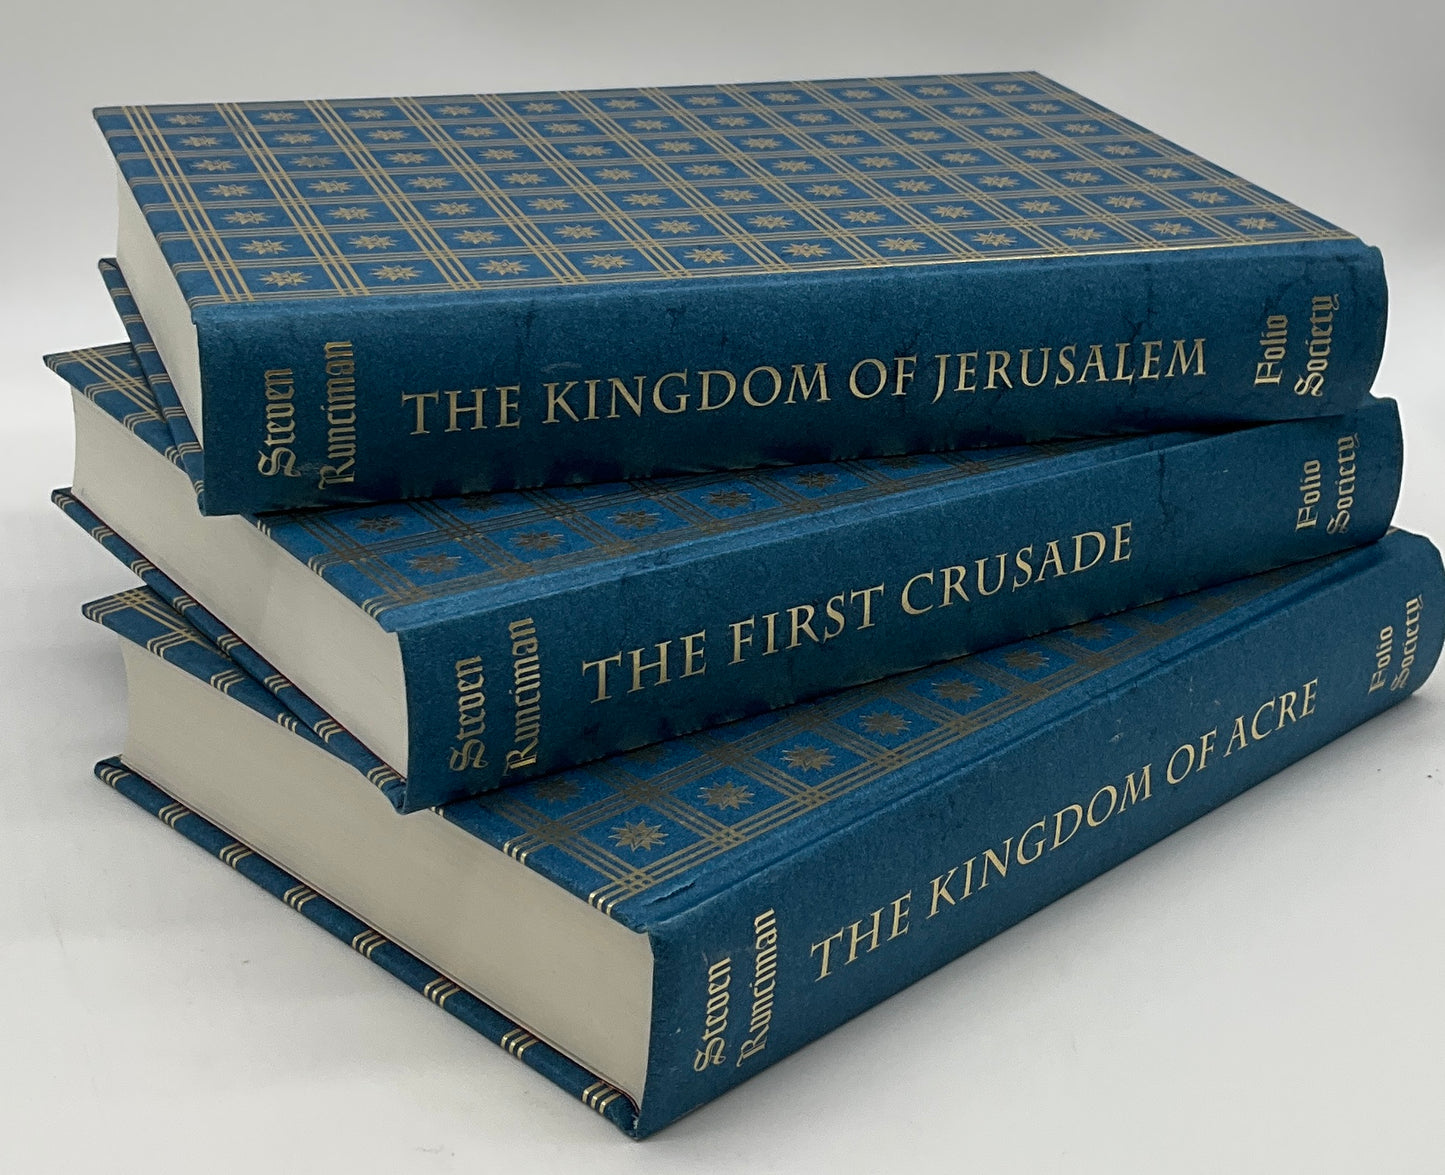 Book: The History Of The Crusades